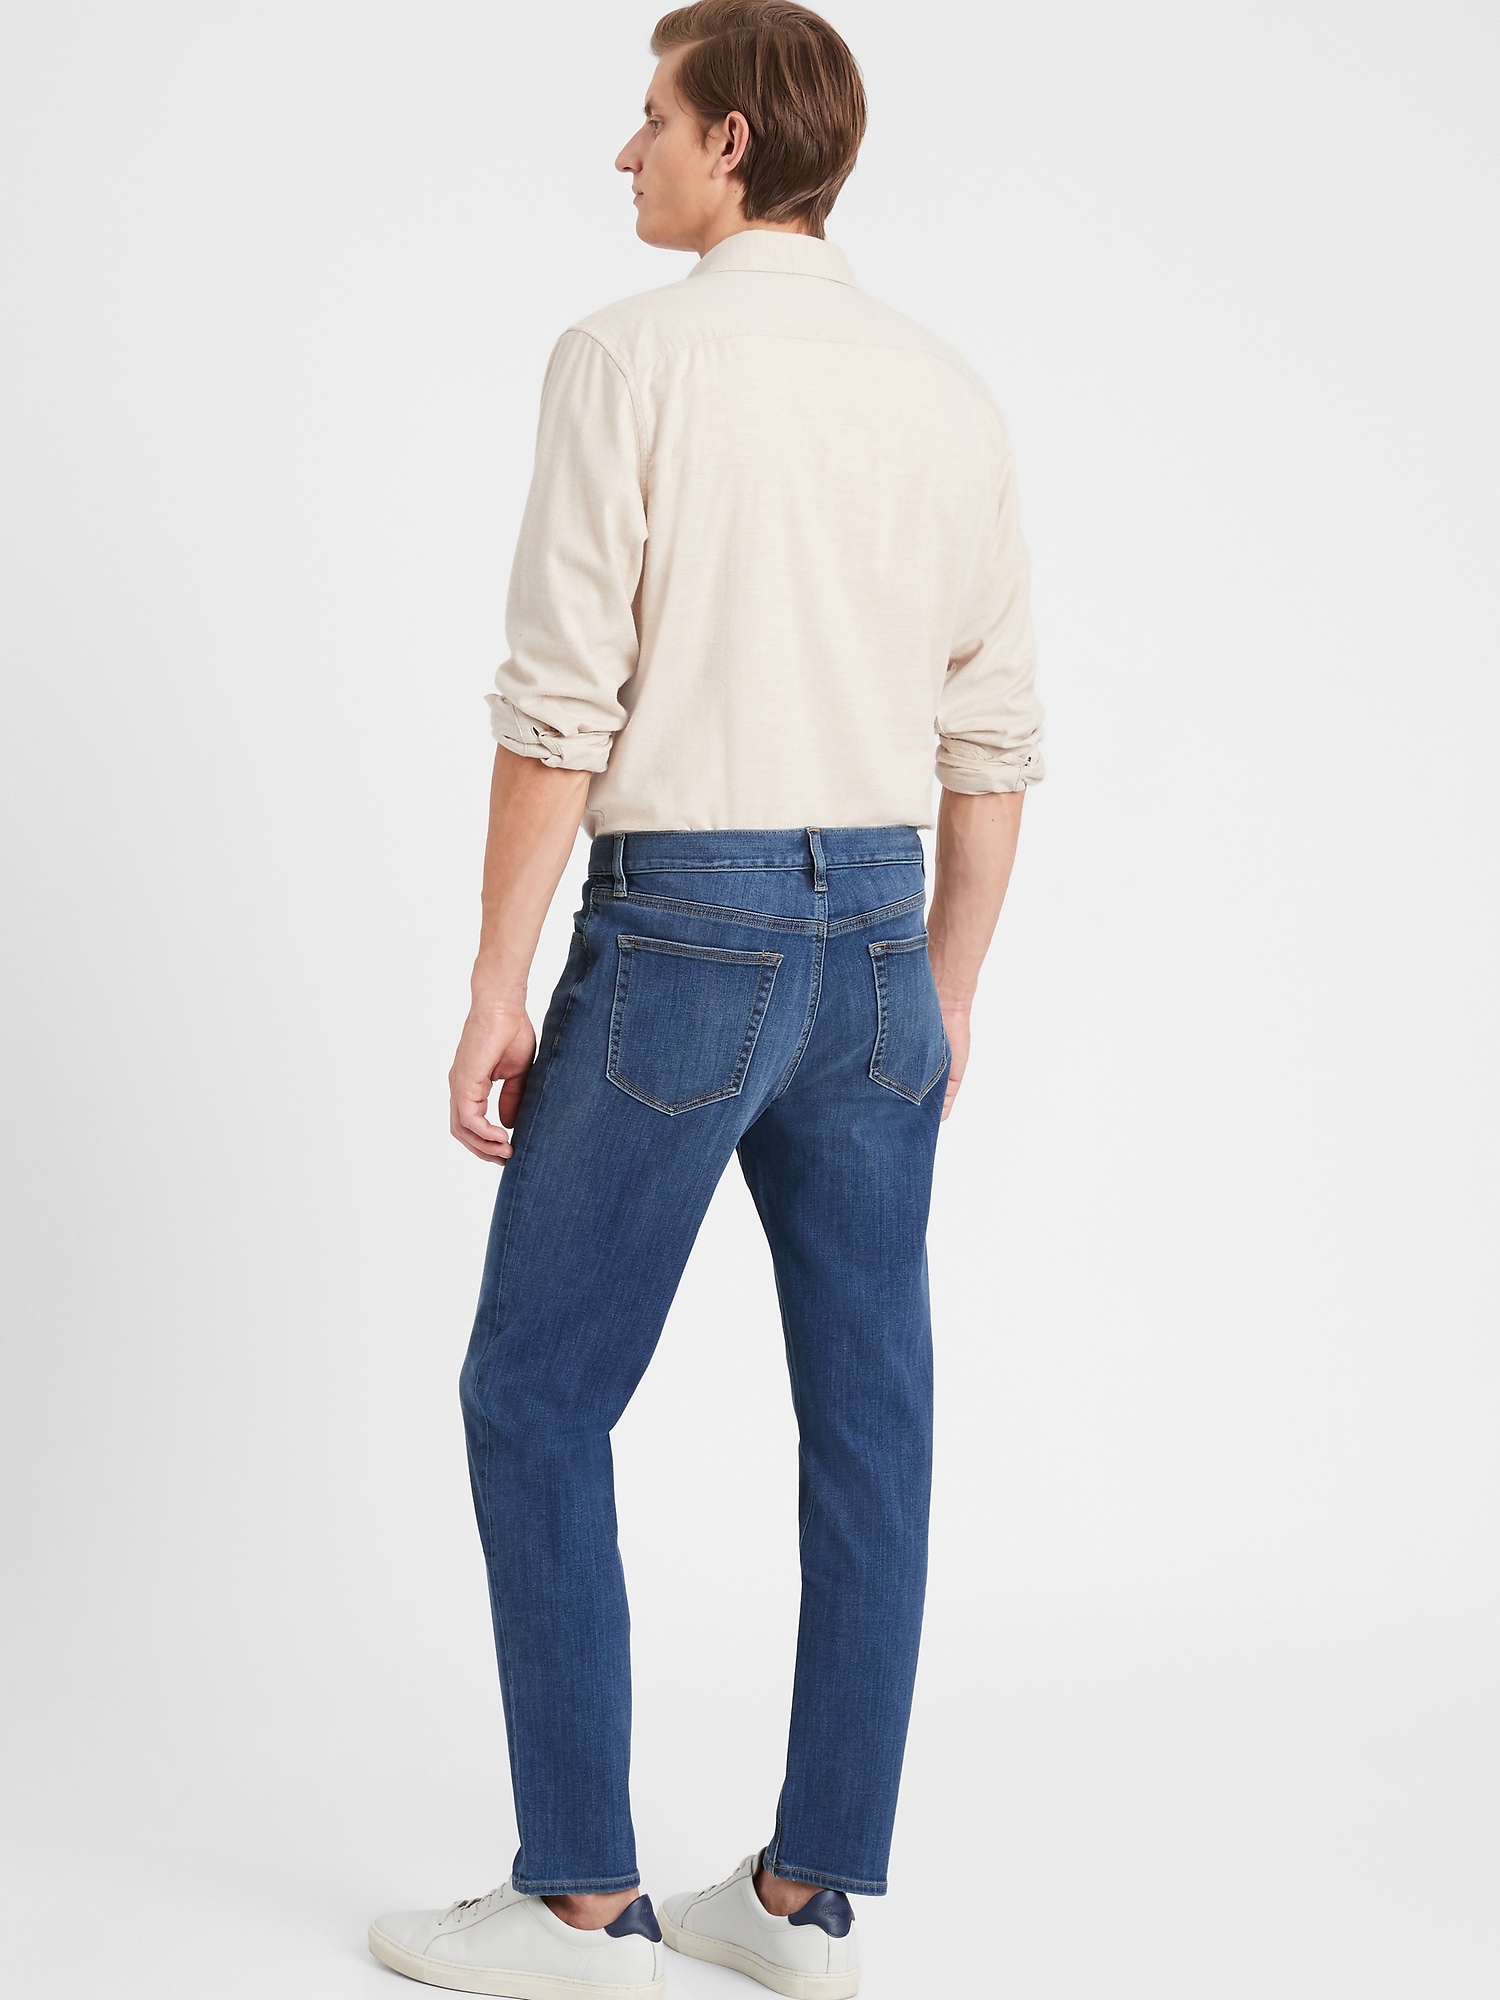 Athletic Tapered LUXE Traveler Jean | Banana Republic